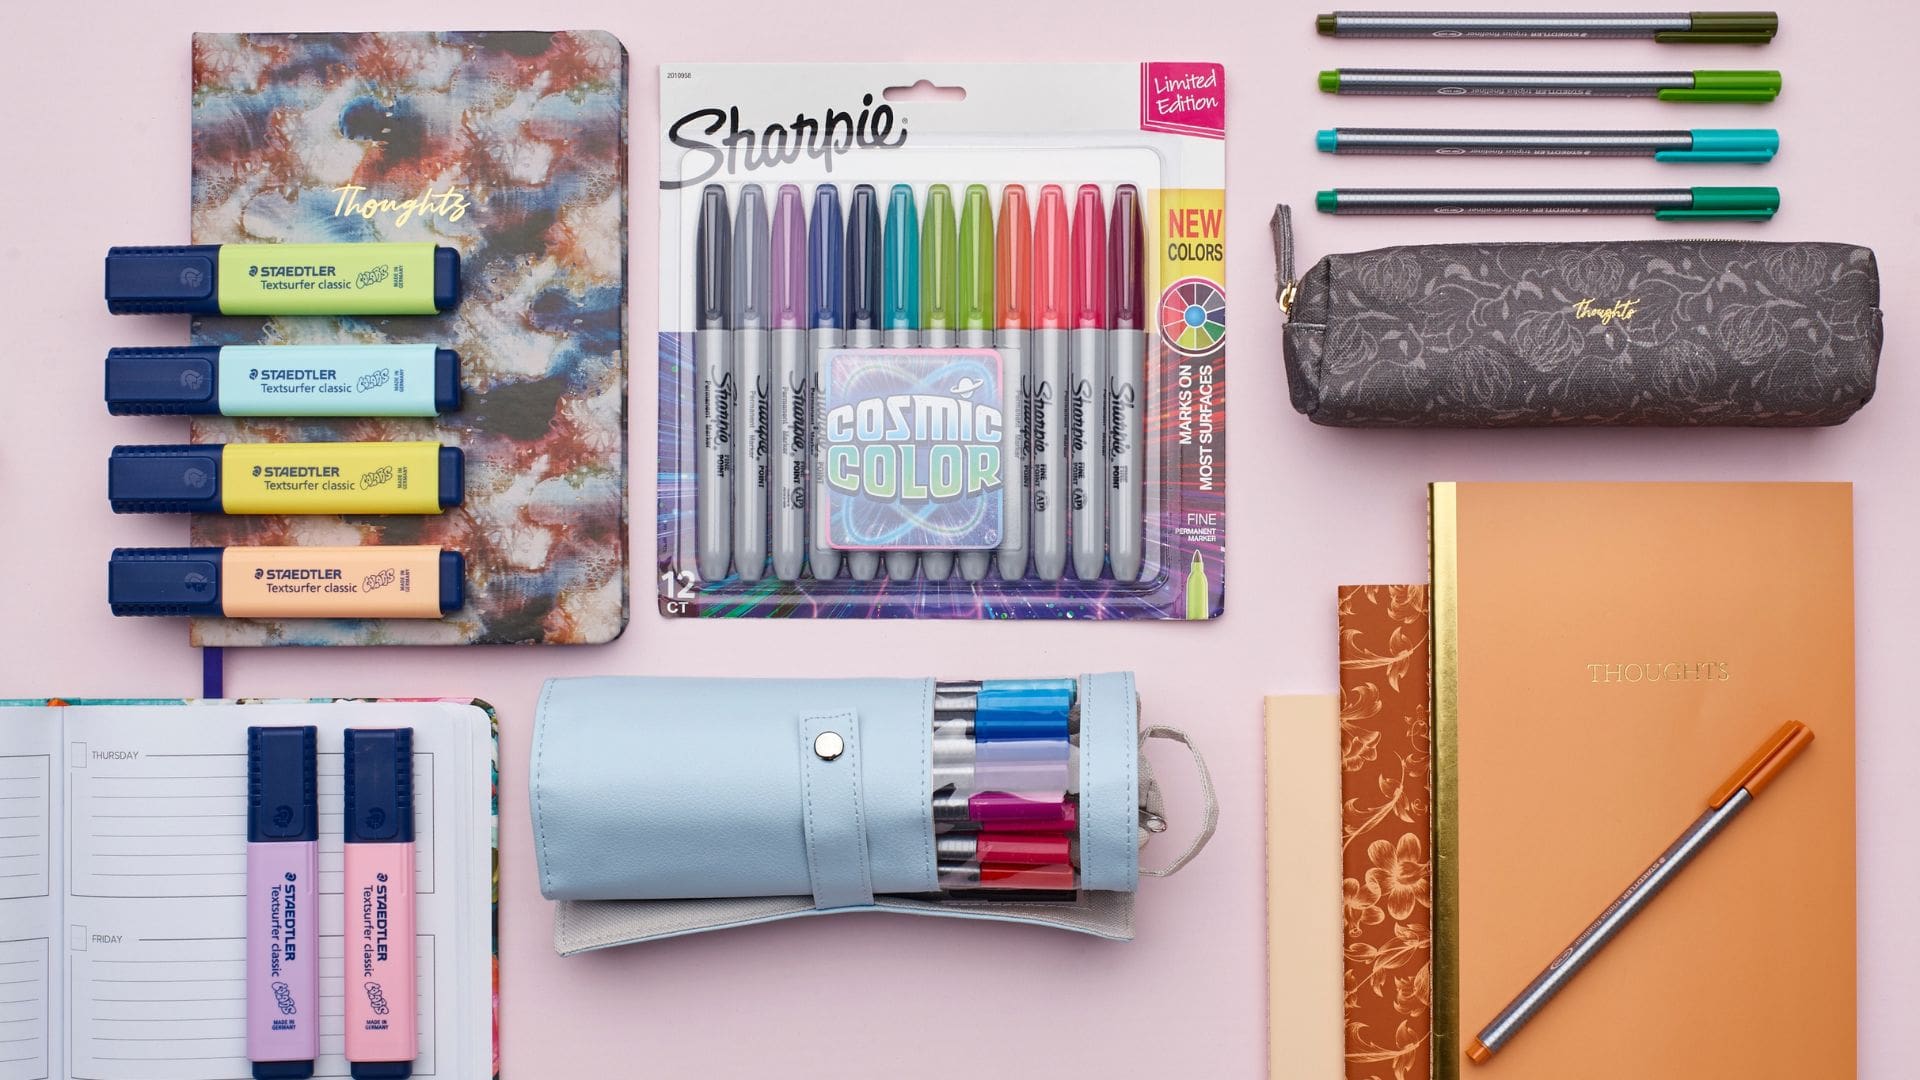 Get School Ready With These 5 Fun School Supplies